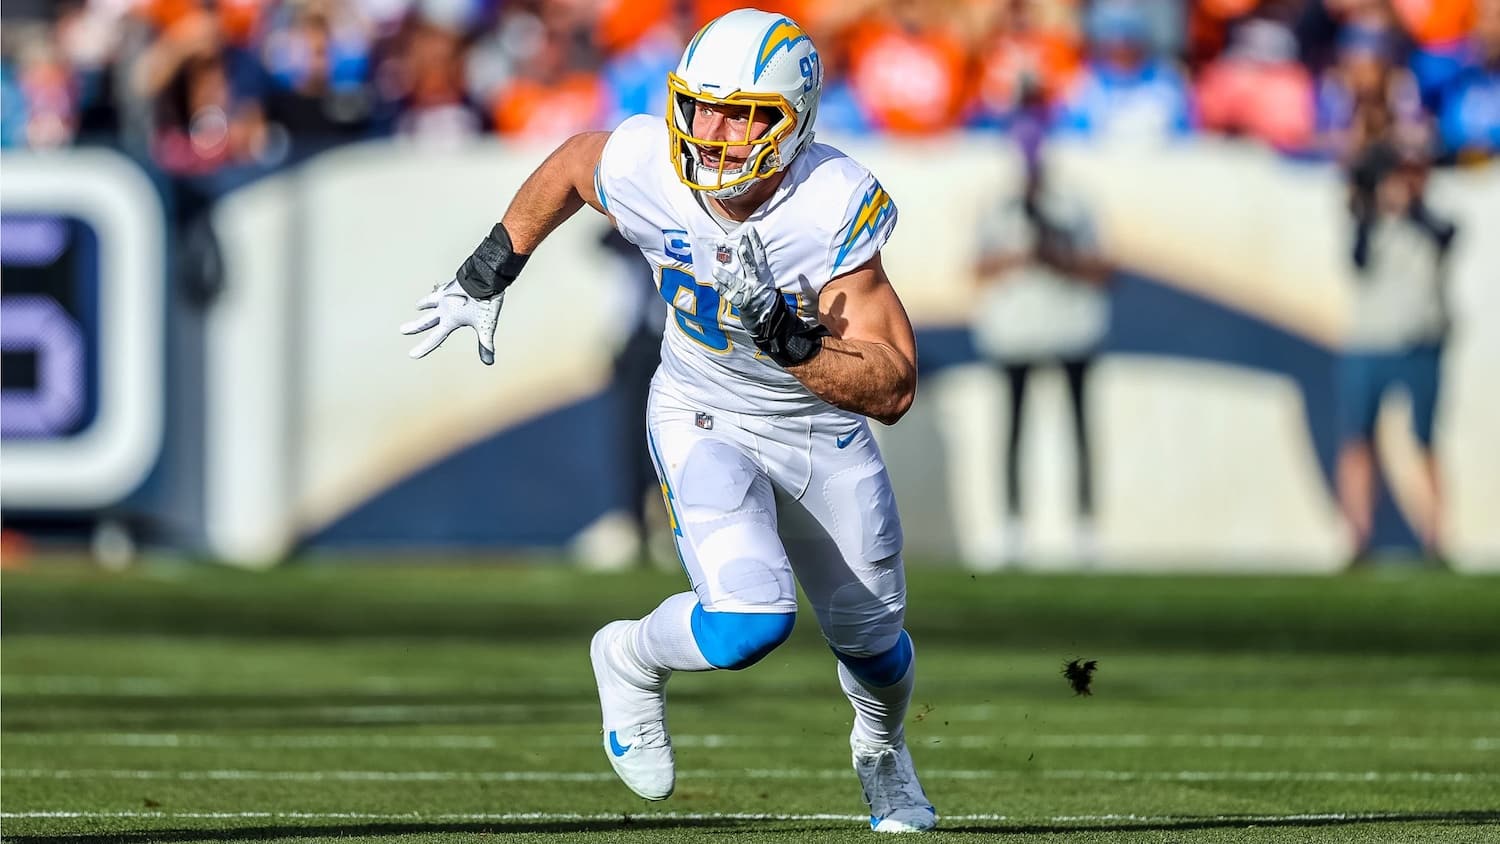 Los Angeles Chargers Edge Rusher Joey Bosa. Photo Credit: Mike Nowak | LA Chargers